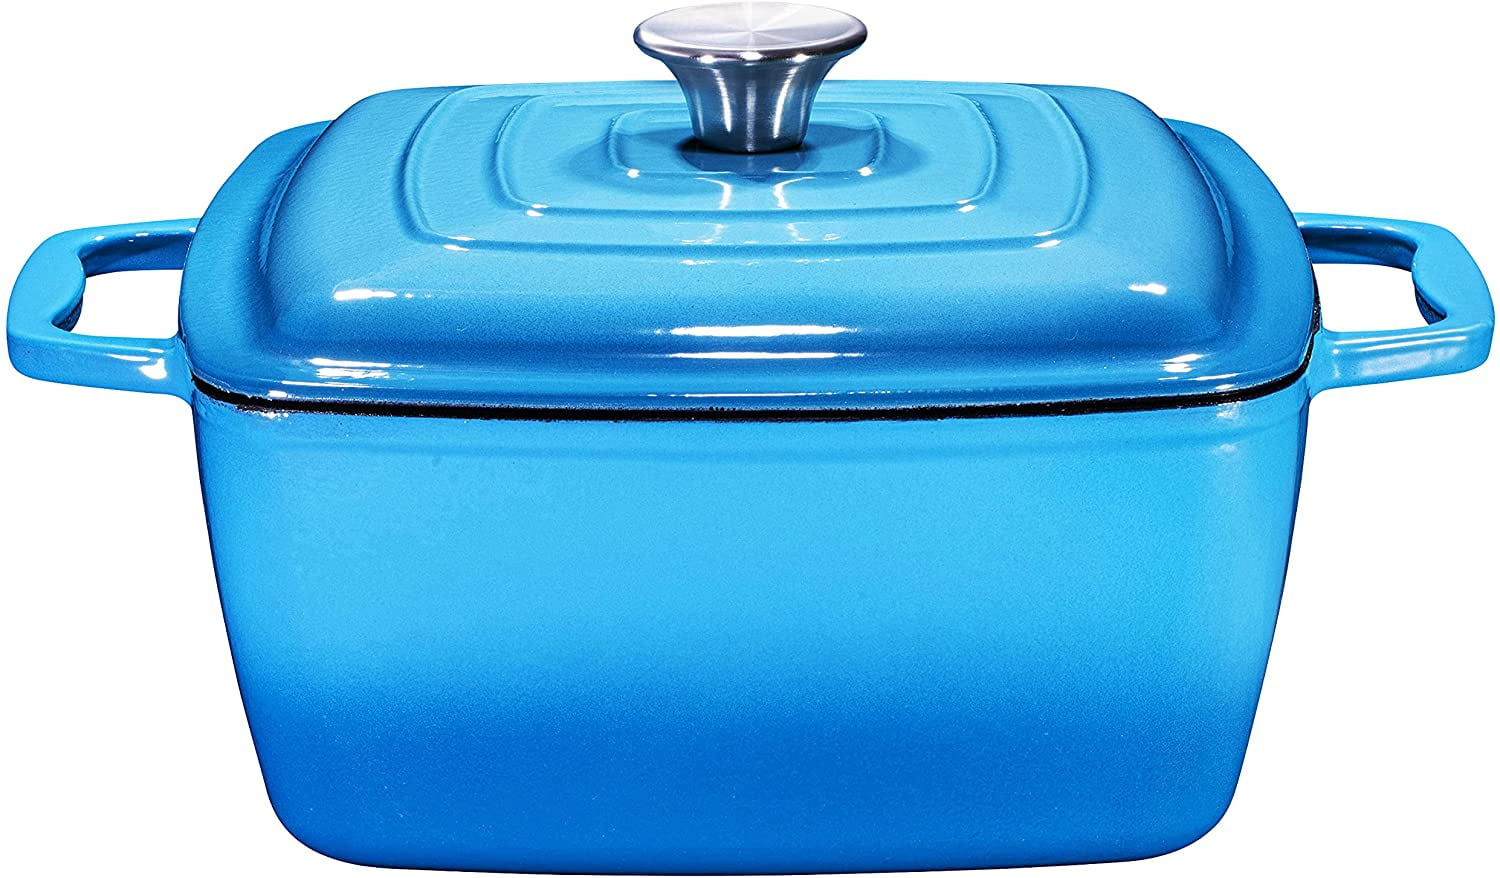 Trustmade 3 QT Cast Iron Dutch Oven, Enamel Coated Cookware Pot with Self  Basting Lid for Home Baking, Braiser, Cooking, Aqua